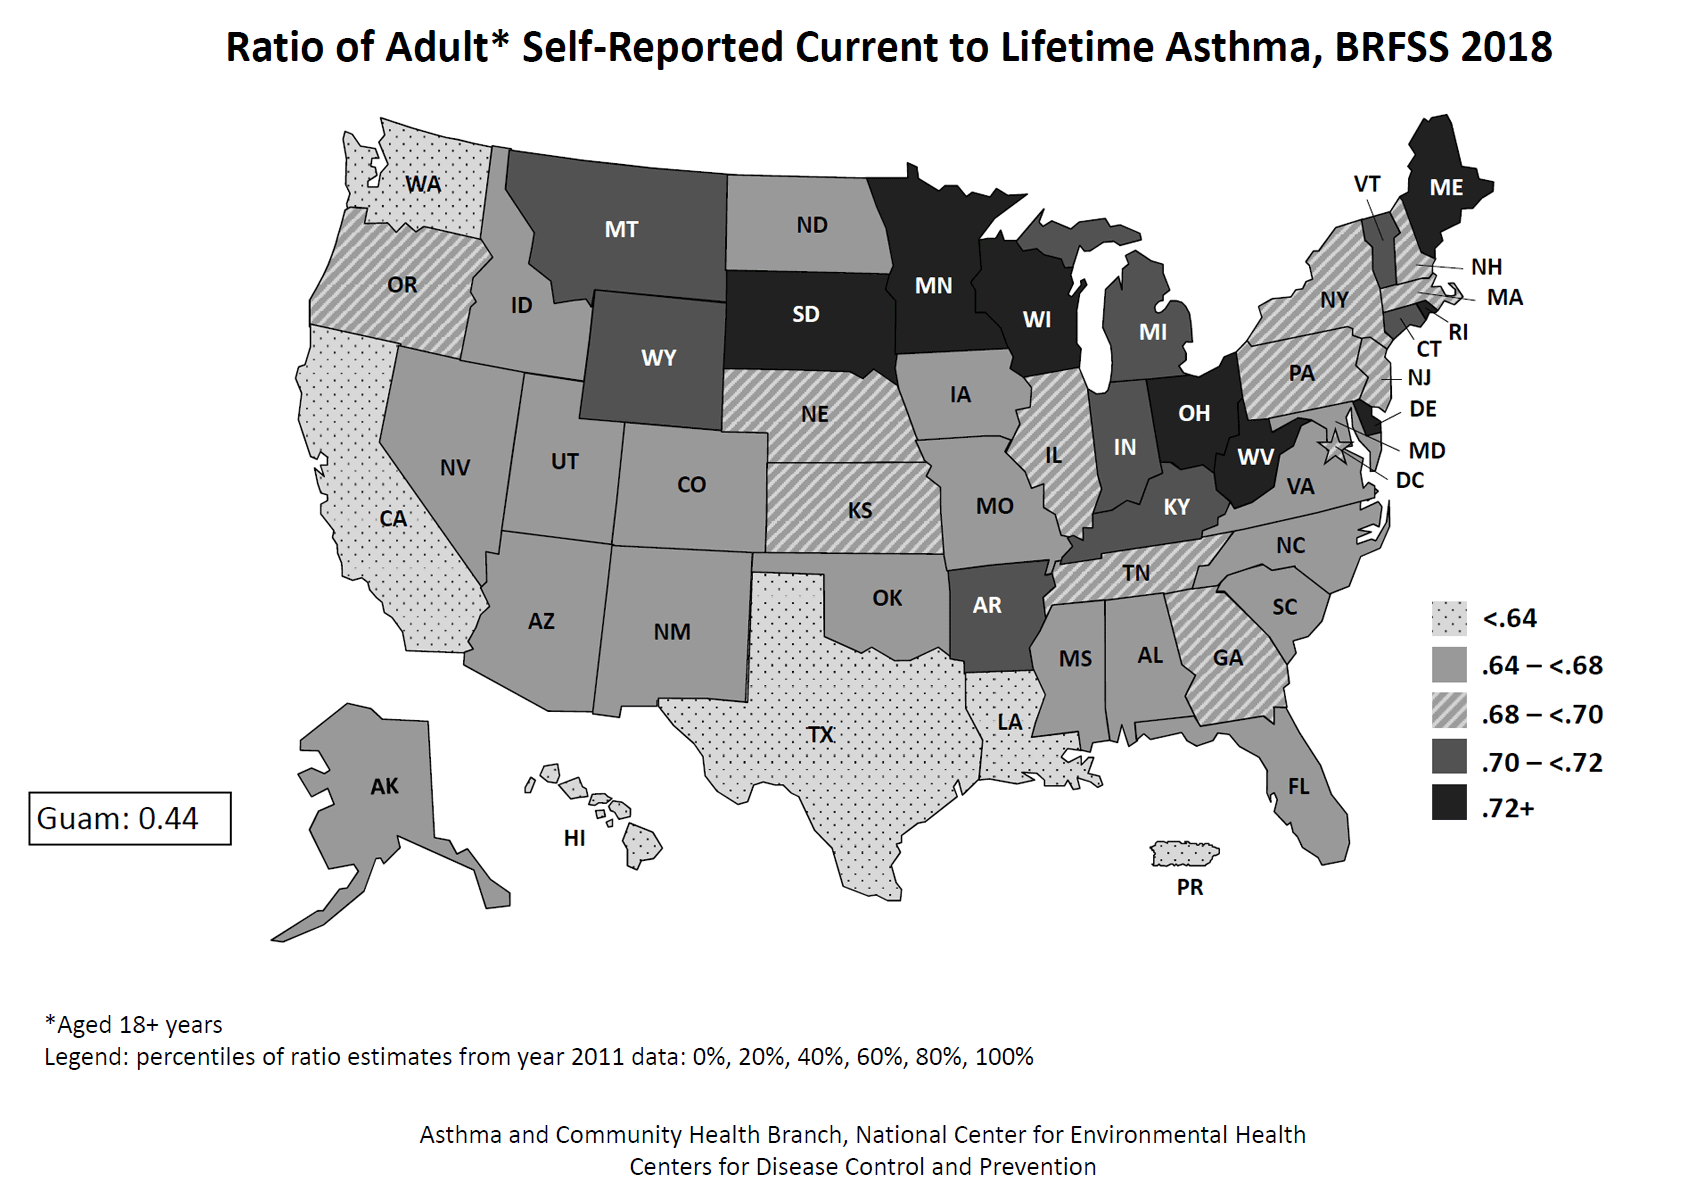 Black and white U.S. map showing ratio of adult self-reported current to lifetime asthma by state for BRFSS 2018